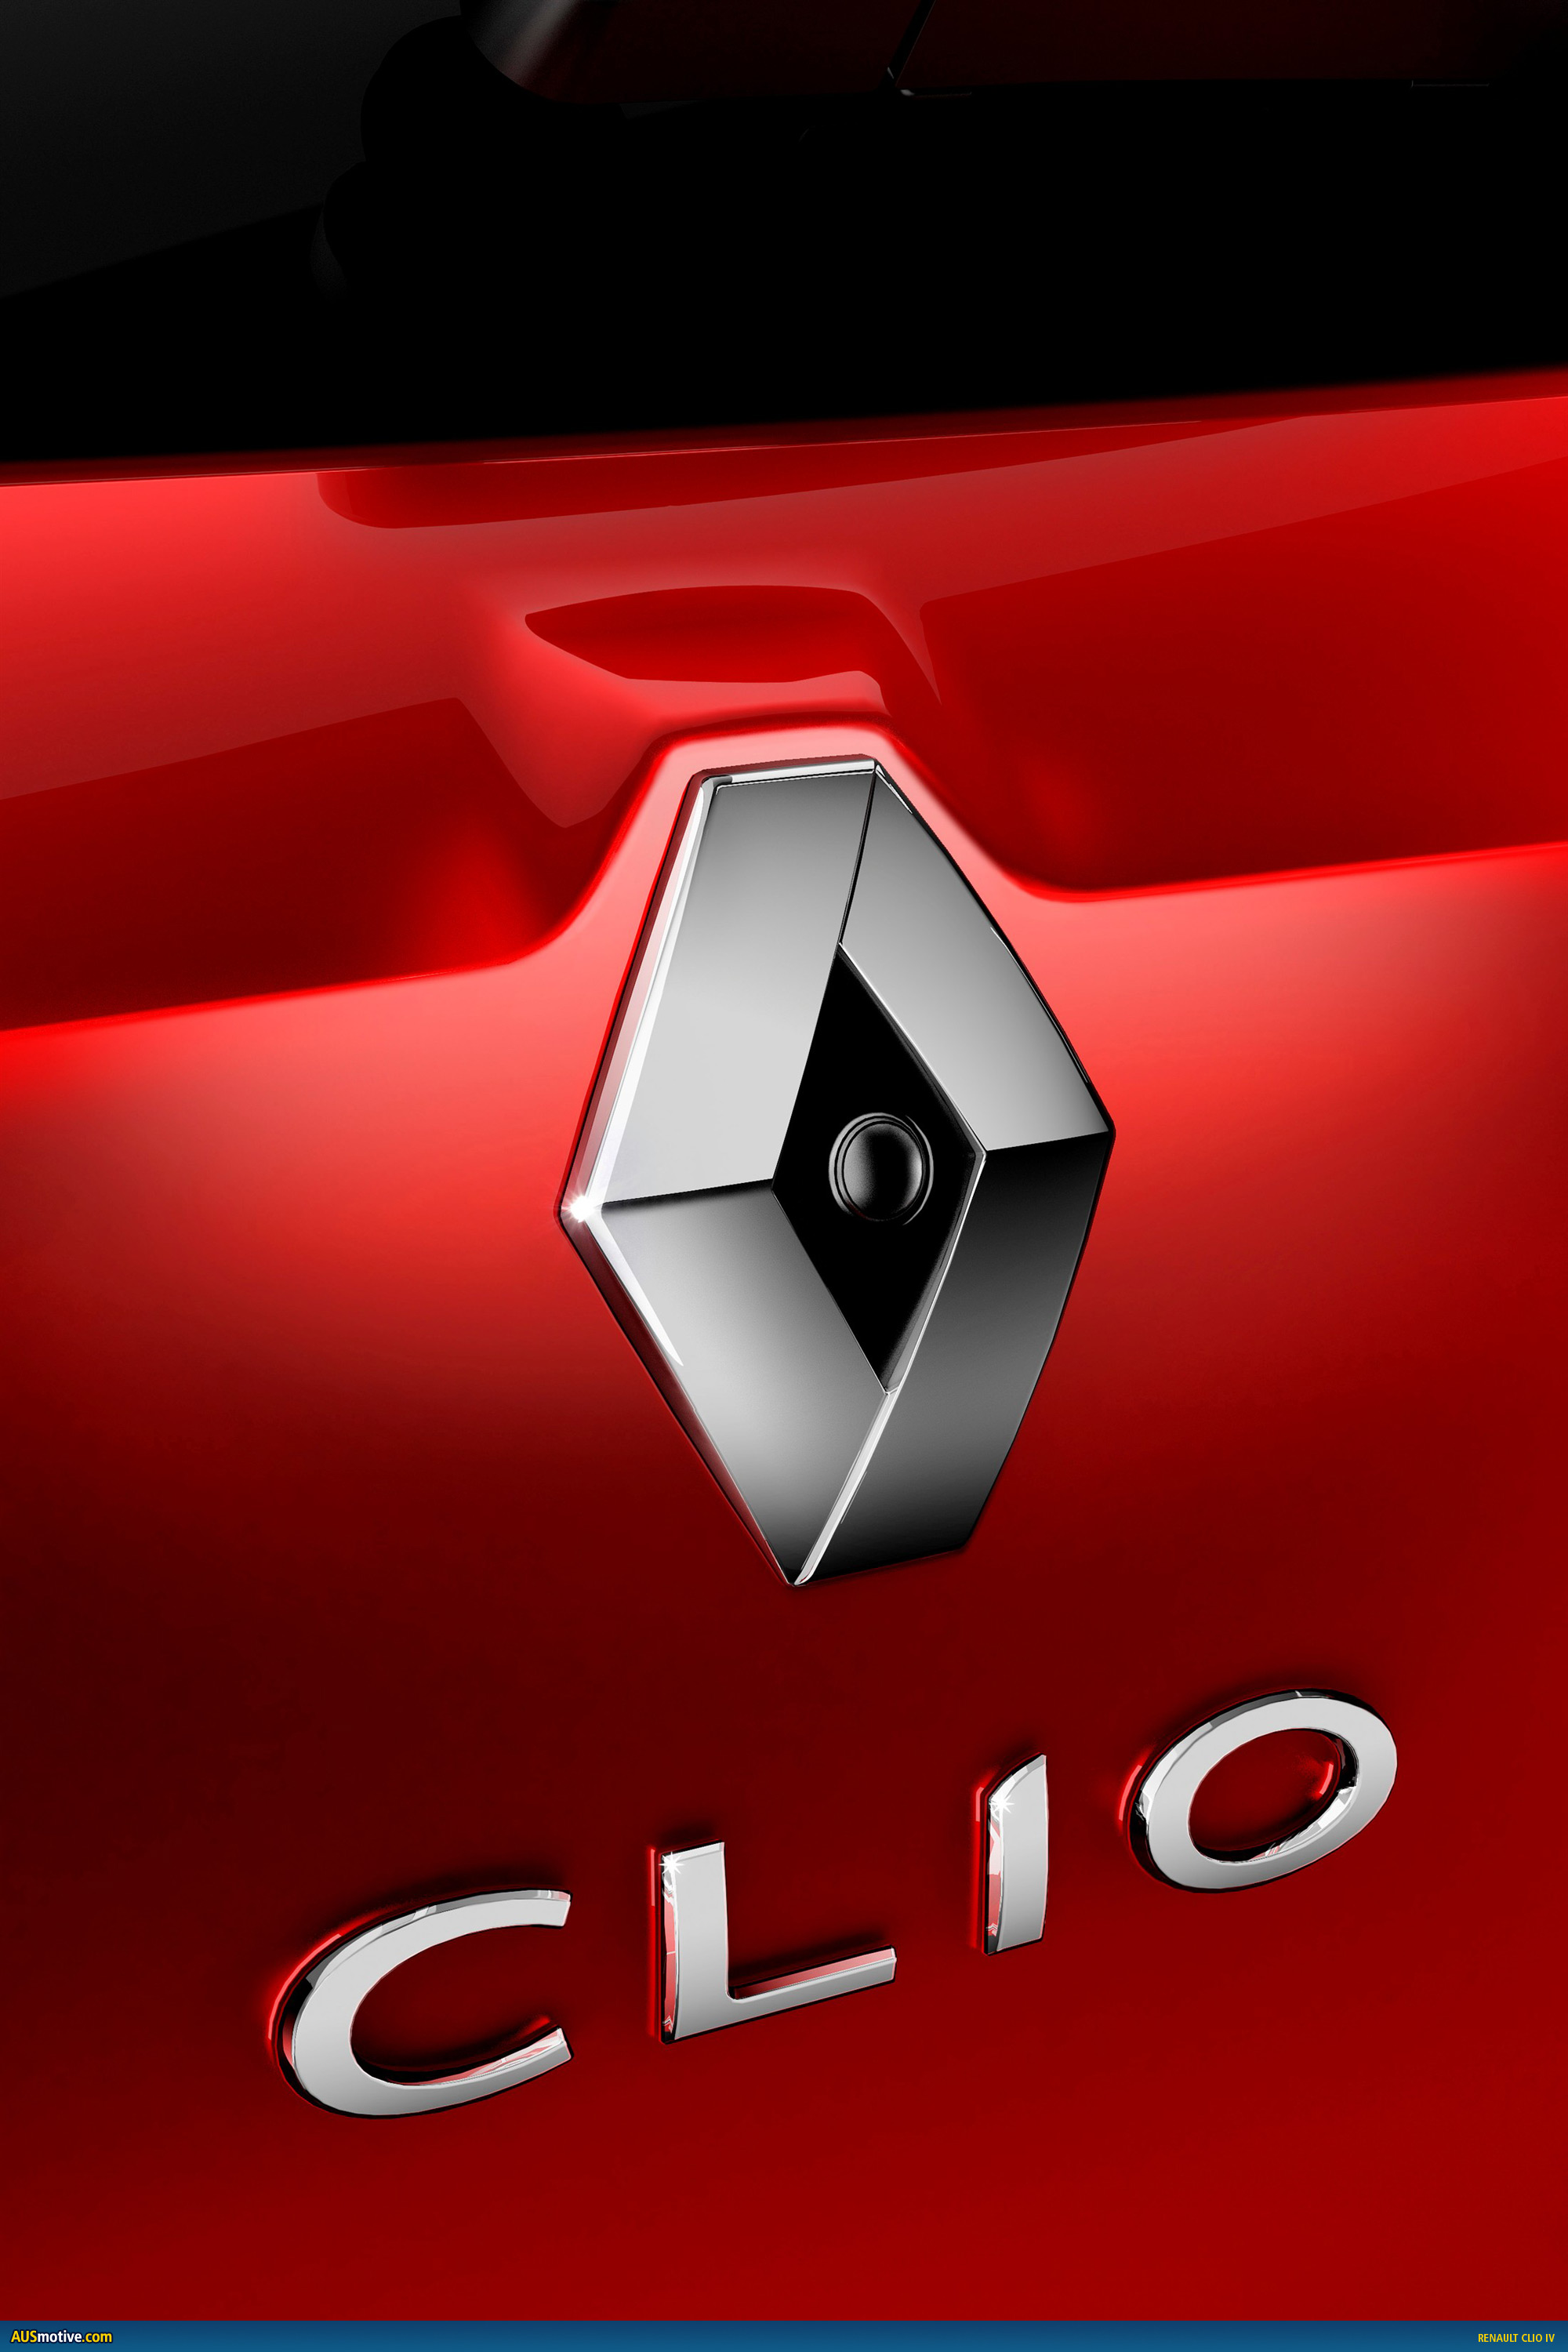 File:Renault Clio IV Logo.svg - Wikimedia Commons